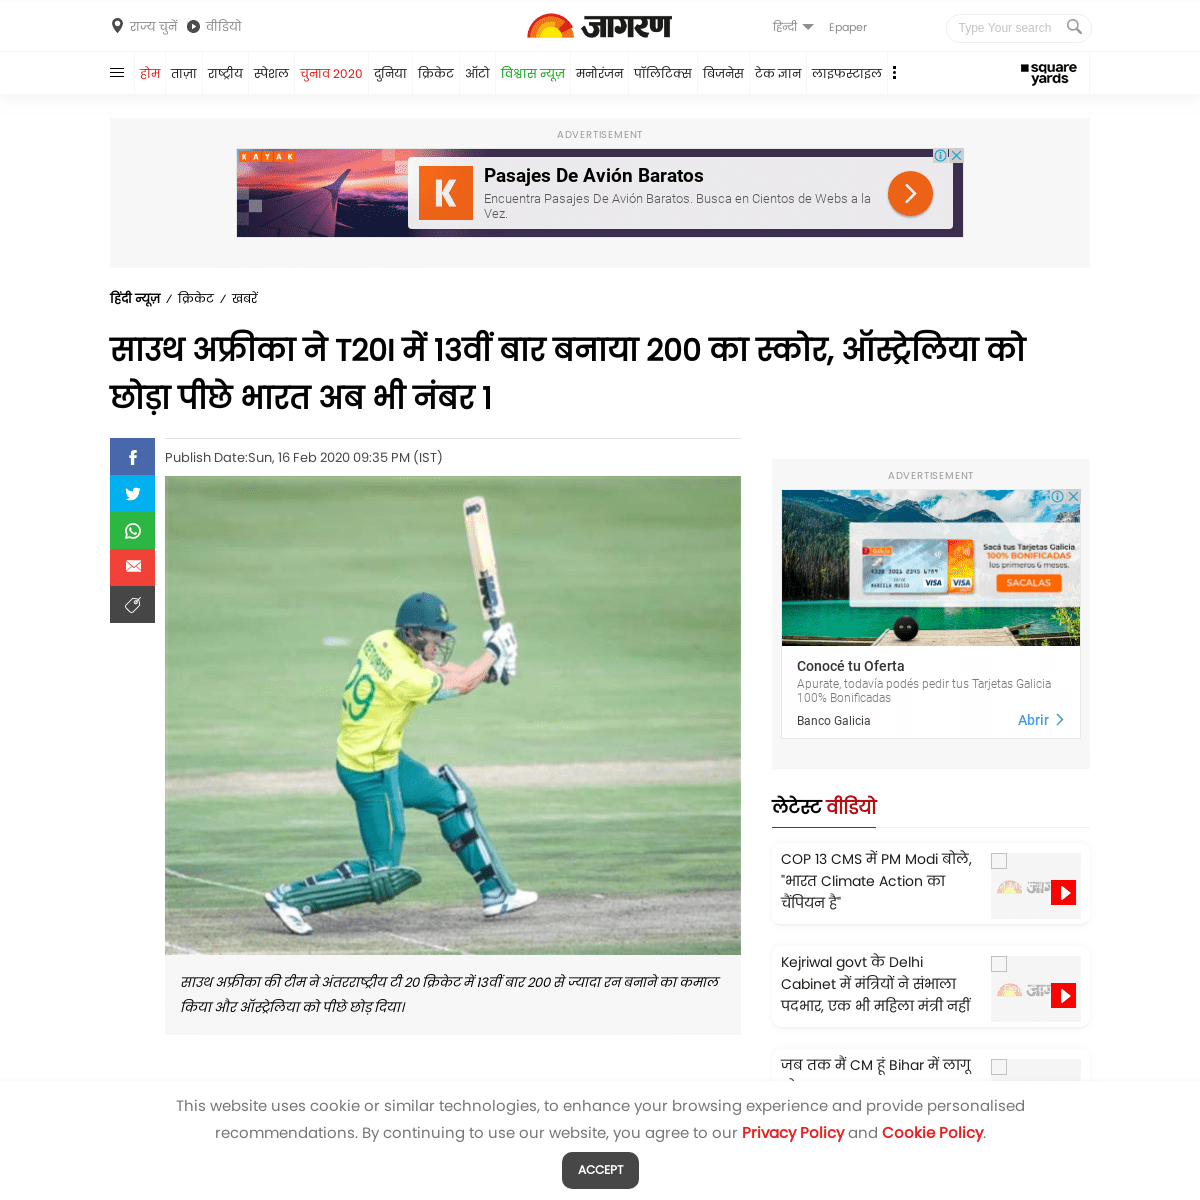 A complete backup of www.jagran.com/cricket/headlines-sa-vs-eng-south-africa-scored-200-plus-runs-13th-time-in-t20i-australia-le